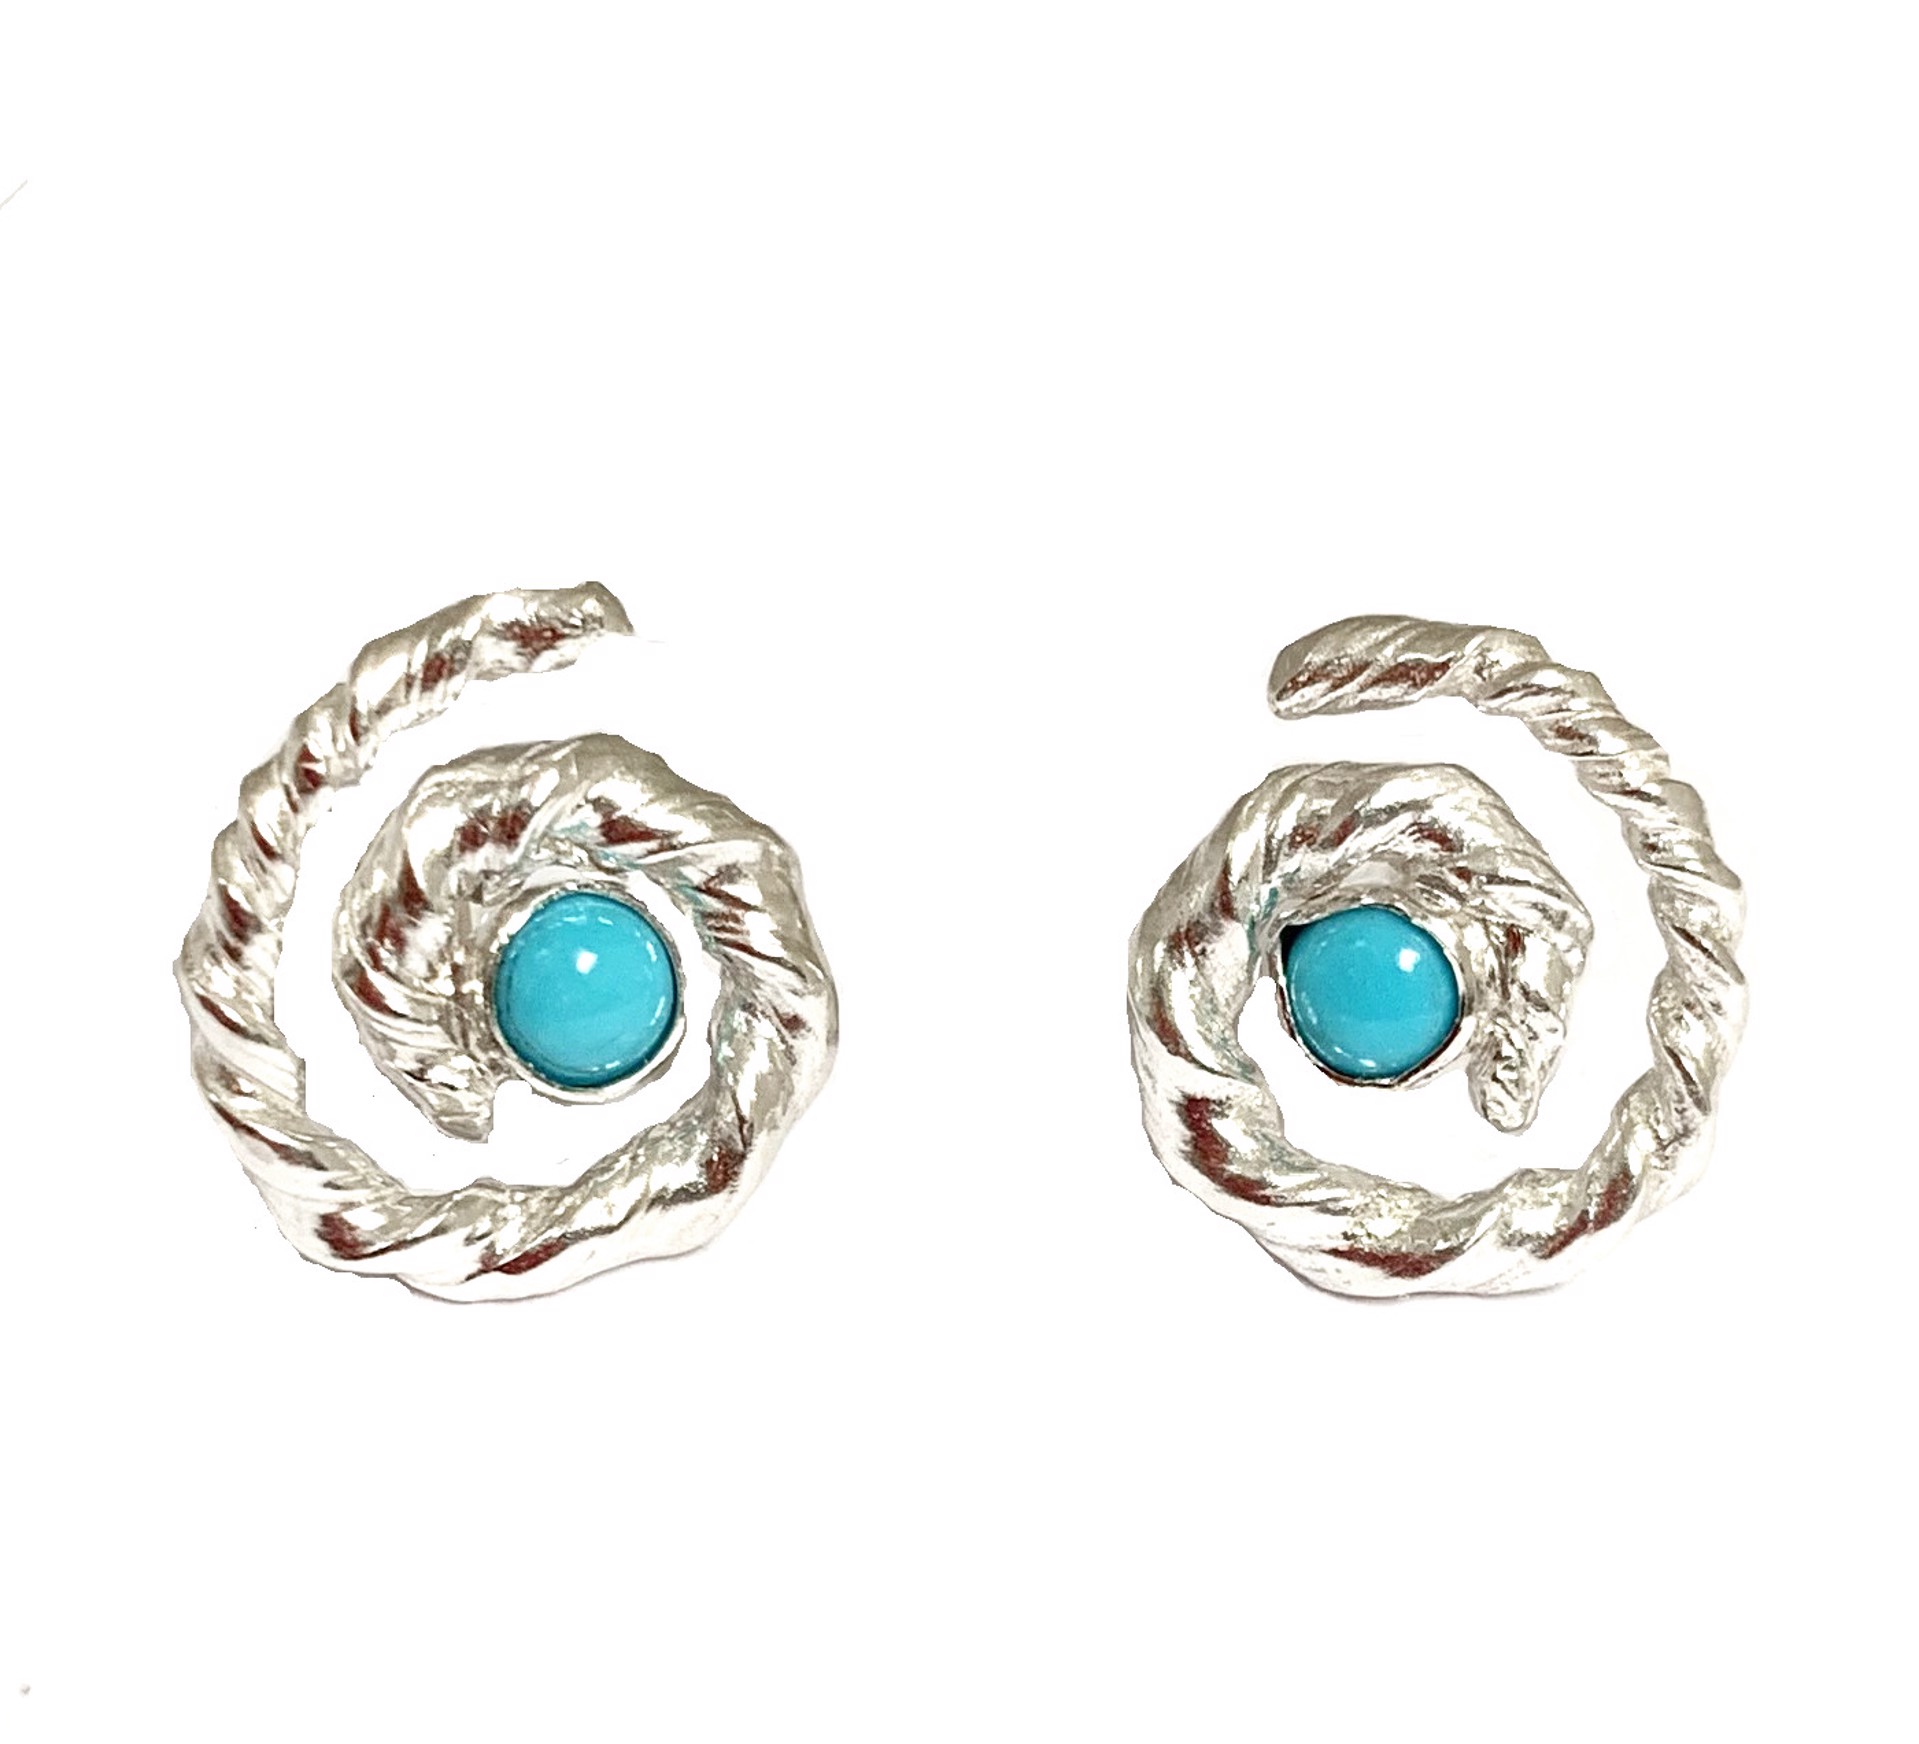 Sleeping Beauty Turquoise Spiral Earrings in Sterling Silver by Melicia Phillips